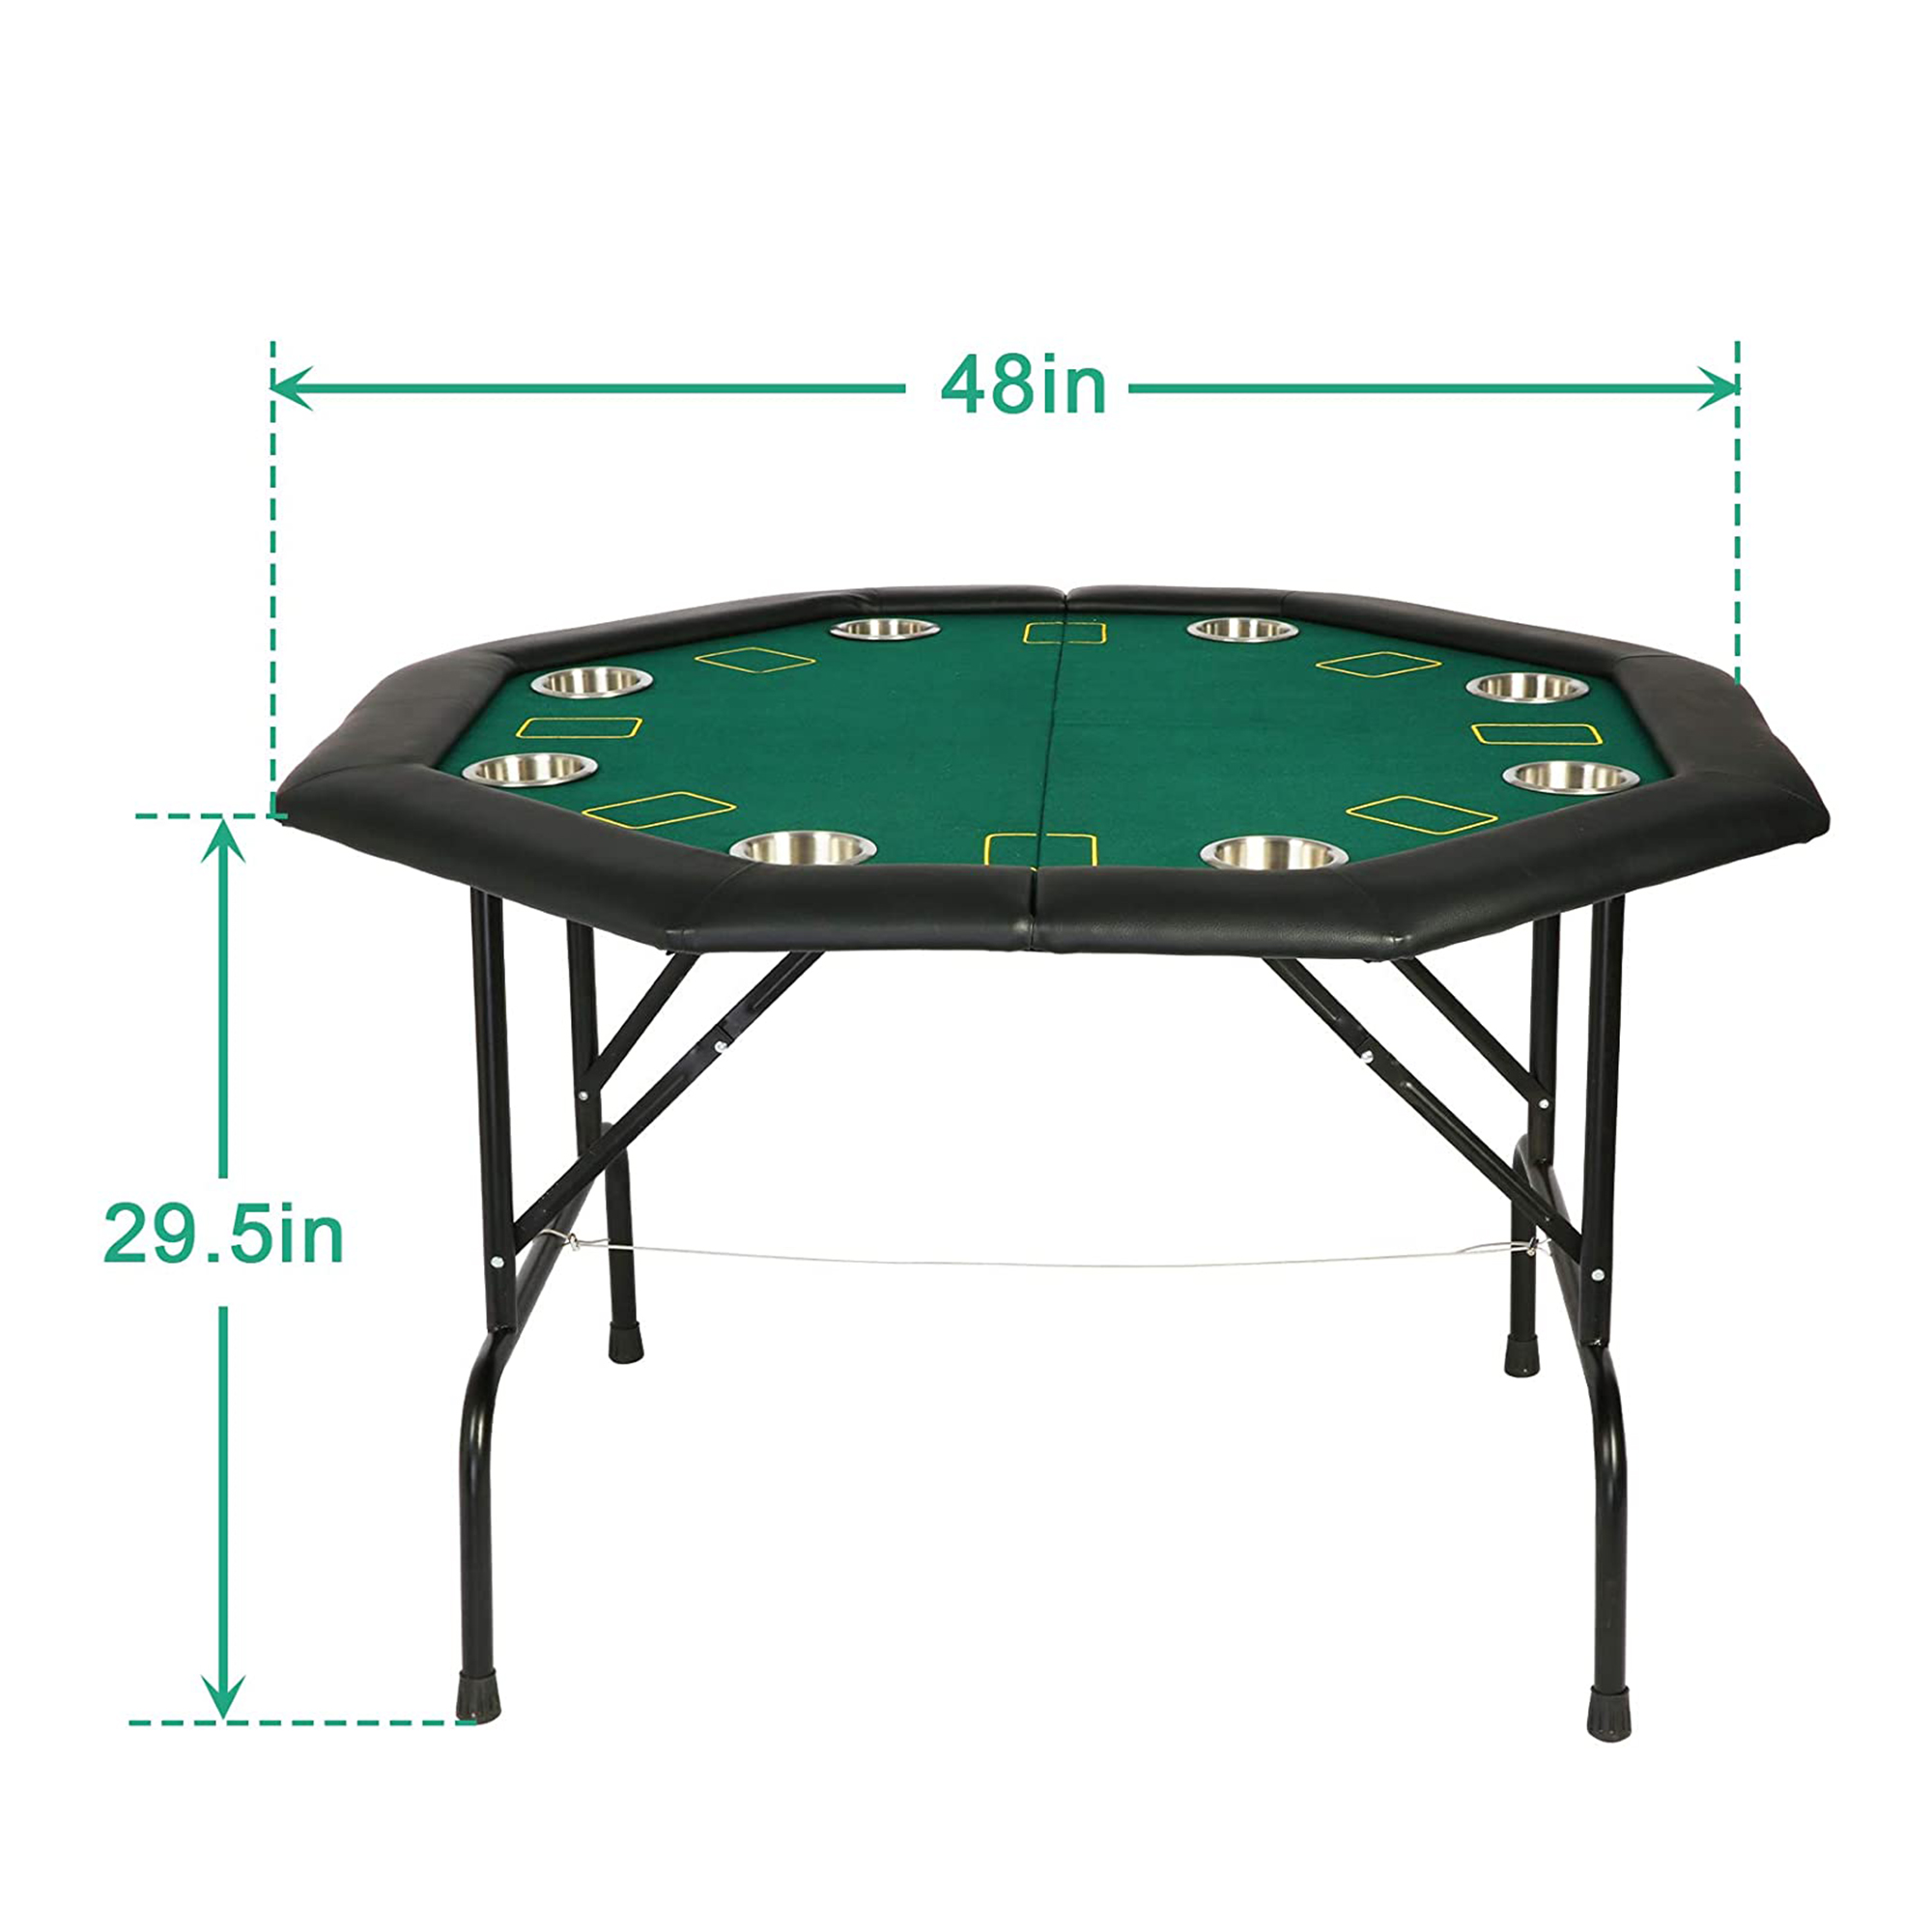 Karmas Product Folding Casino Poker Table with Cup & Foldable Leg for 8 Player, Octagon Texas Hold'em Poker Mat for Blackjack, Club, Family Games - image 2 of 8